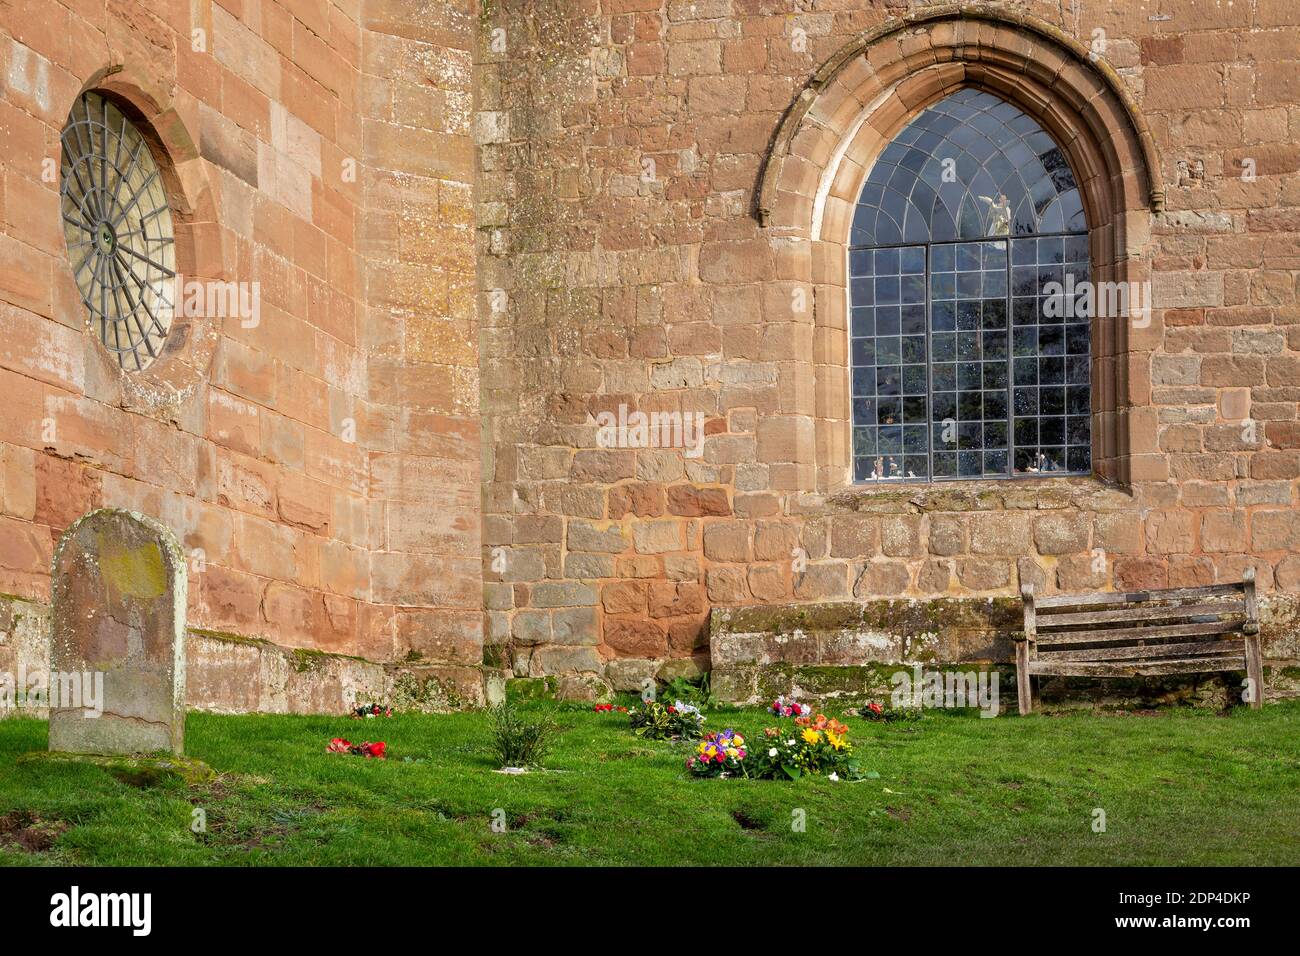 St.Mary The Virgin Church, Hanbury in Worcestershire, England. Stock Photo